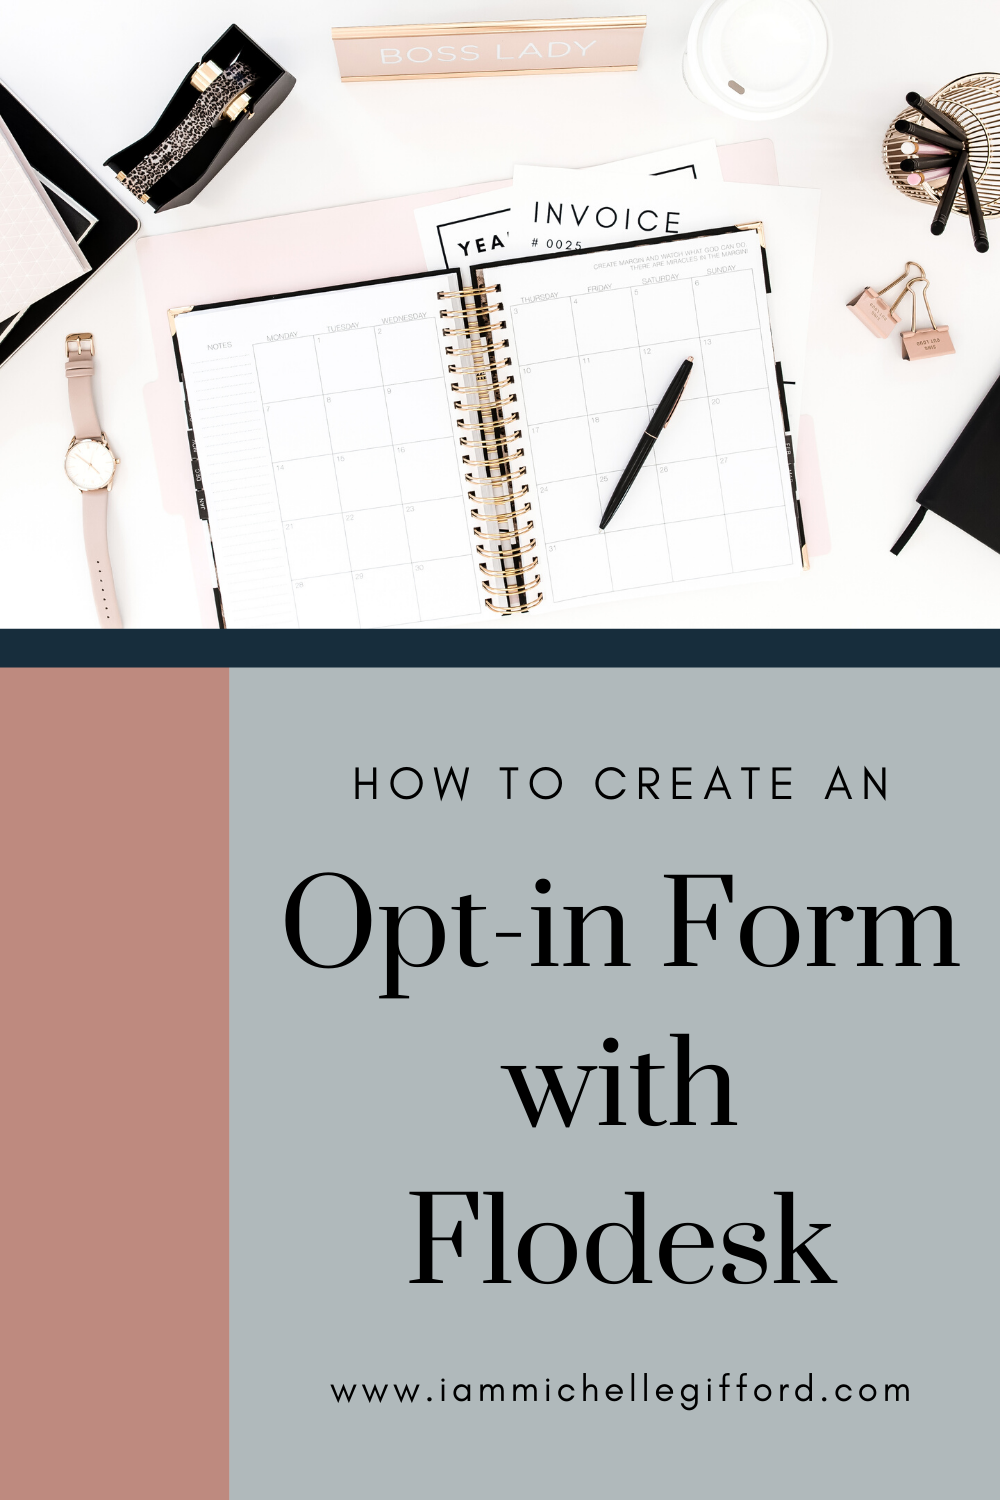 How to Create an Opt-in Form with Flodesk Simple email sign ups for business www.iammichellegifford.com